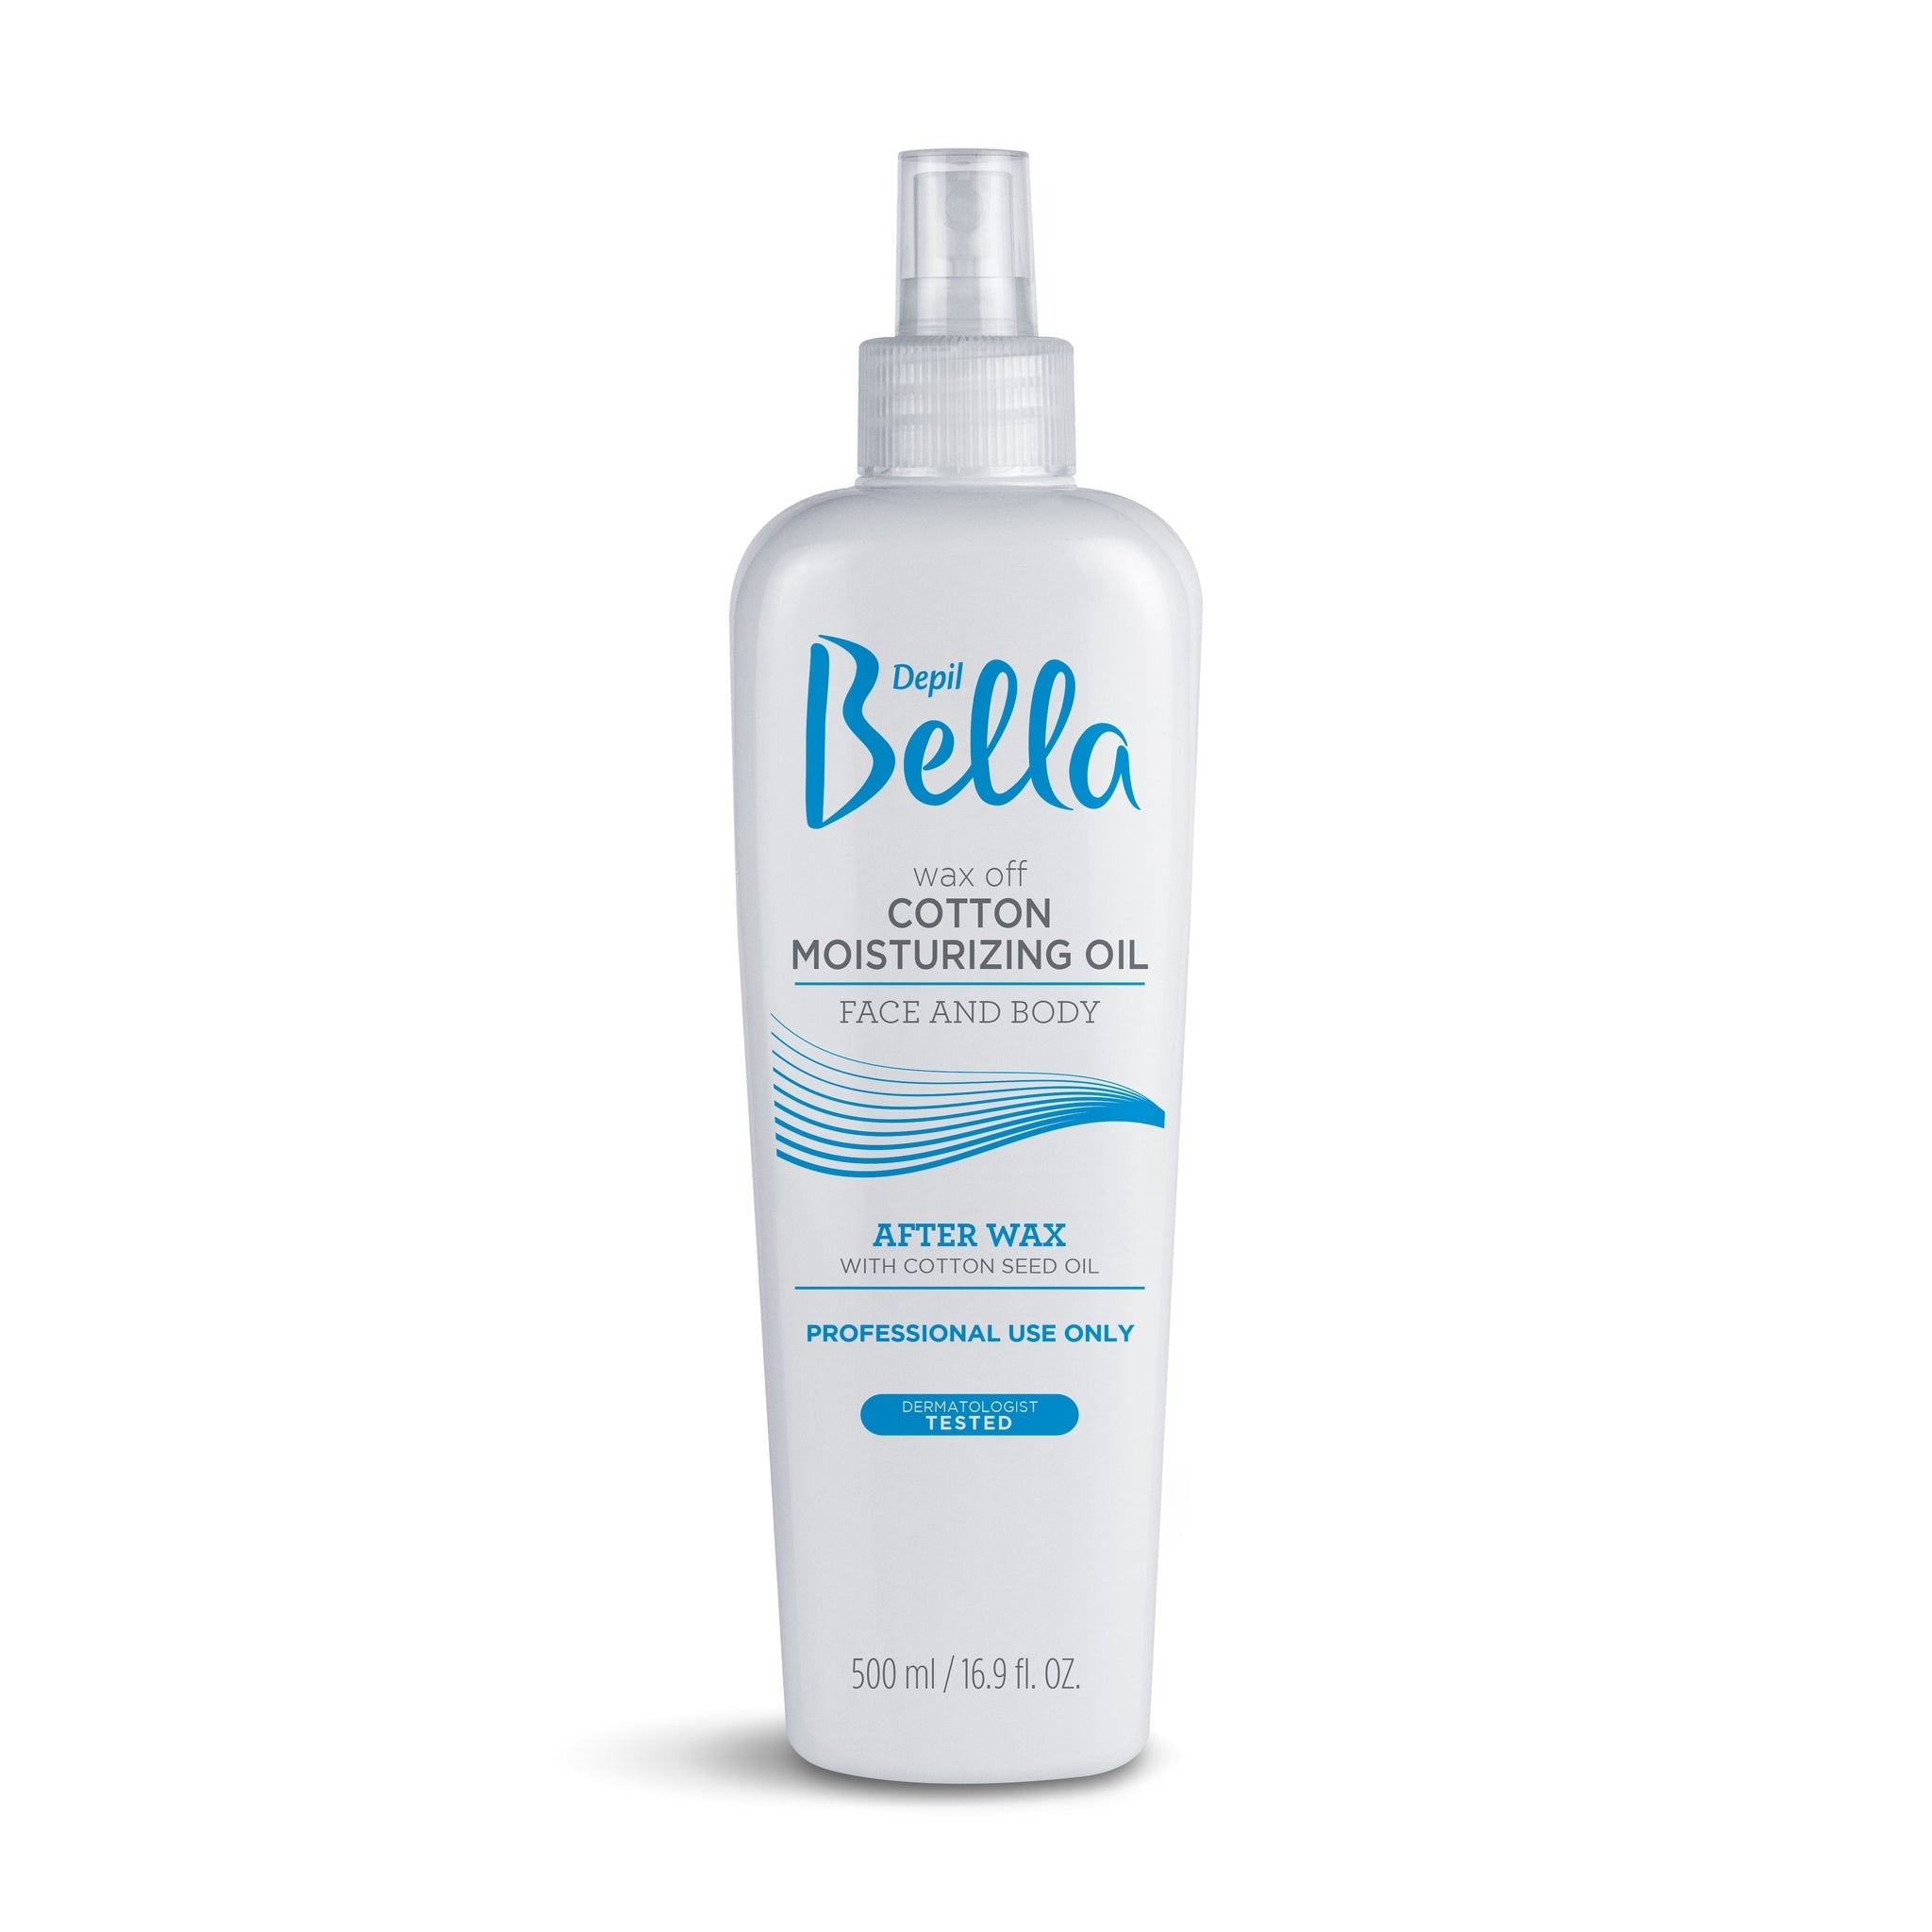 Depil Bella Body Oil Depil Bella Post Waxing Body Oil Moisturizing Remover with Cotton Seed Oil 500 ml (6 Units )